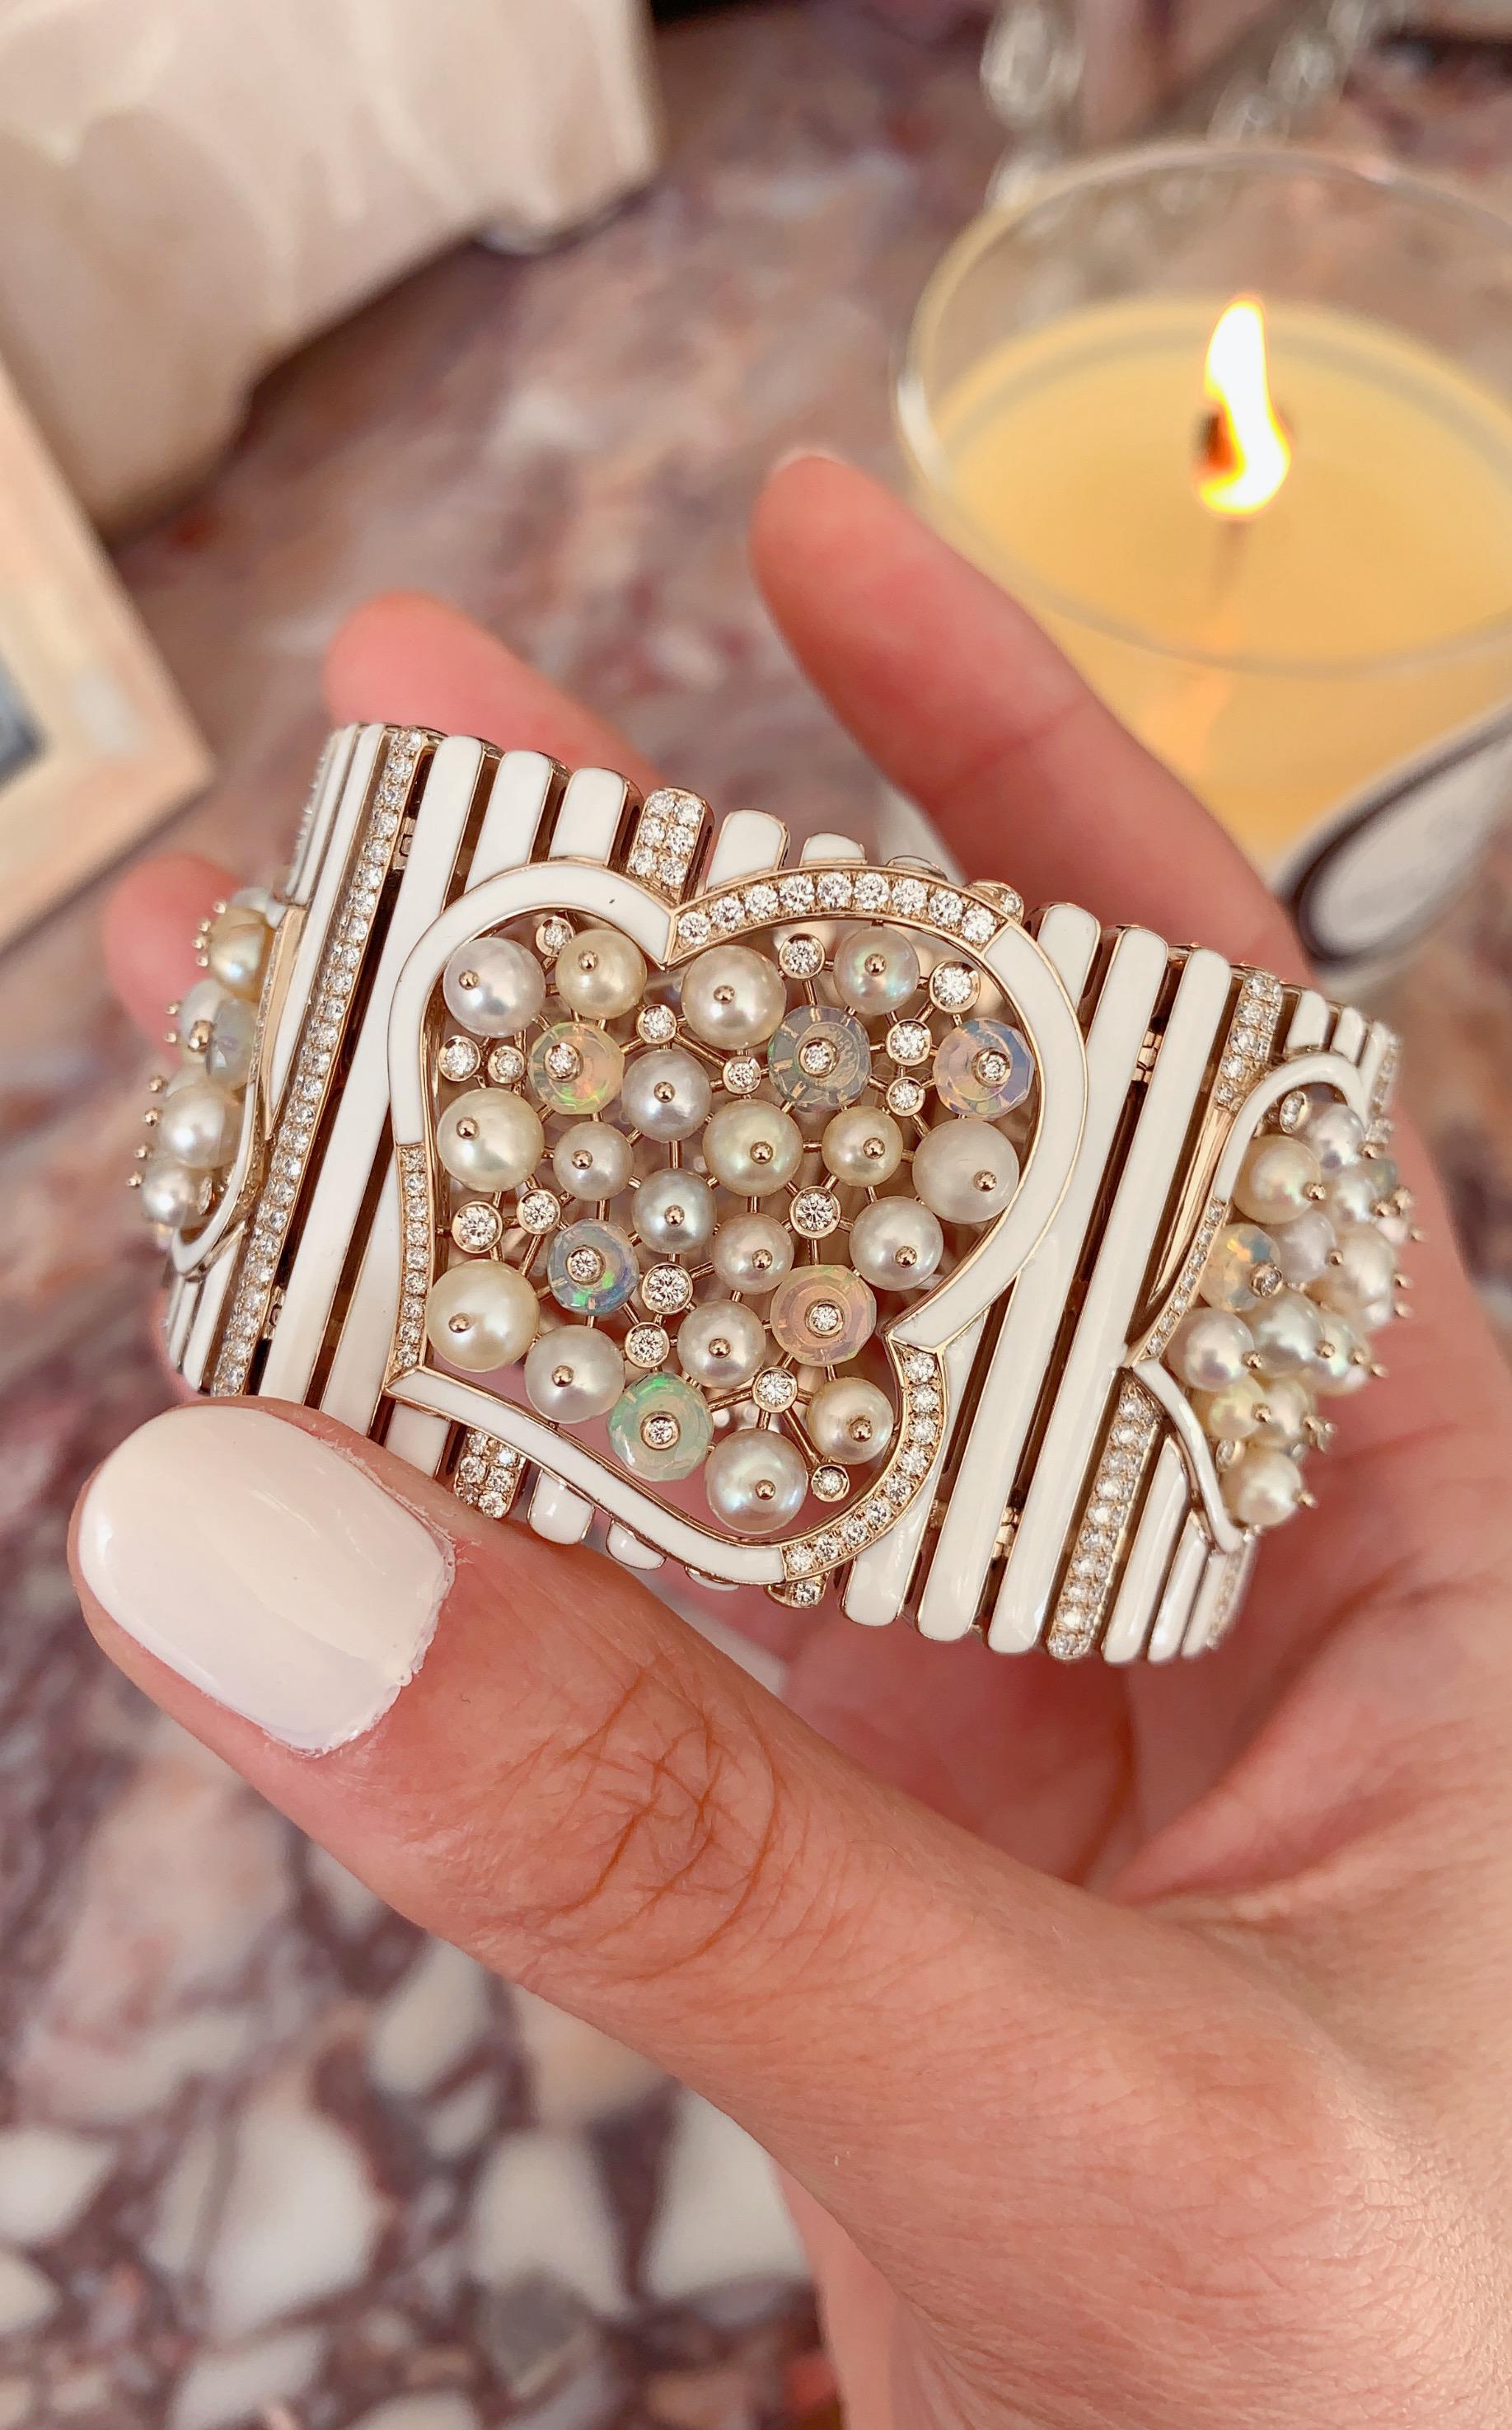 A Natural Pearl, Opal, Diamond and Enamel Gold Cuff as part of the Selene Suite by Jewelry Designer, Sarah Ho.

The Selene pieces capture the luminescent beauty of the natural pearls - these pearls range in color from apricot to lavender - an